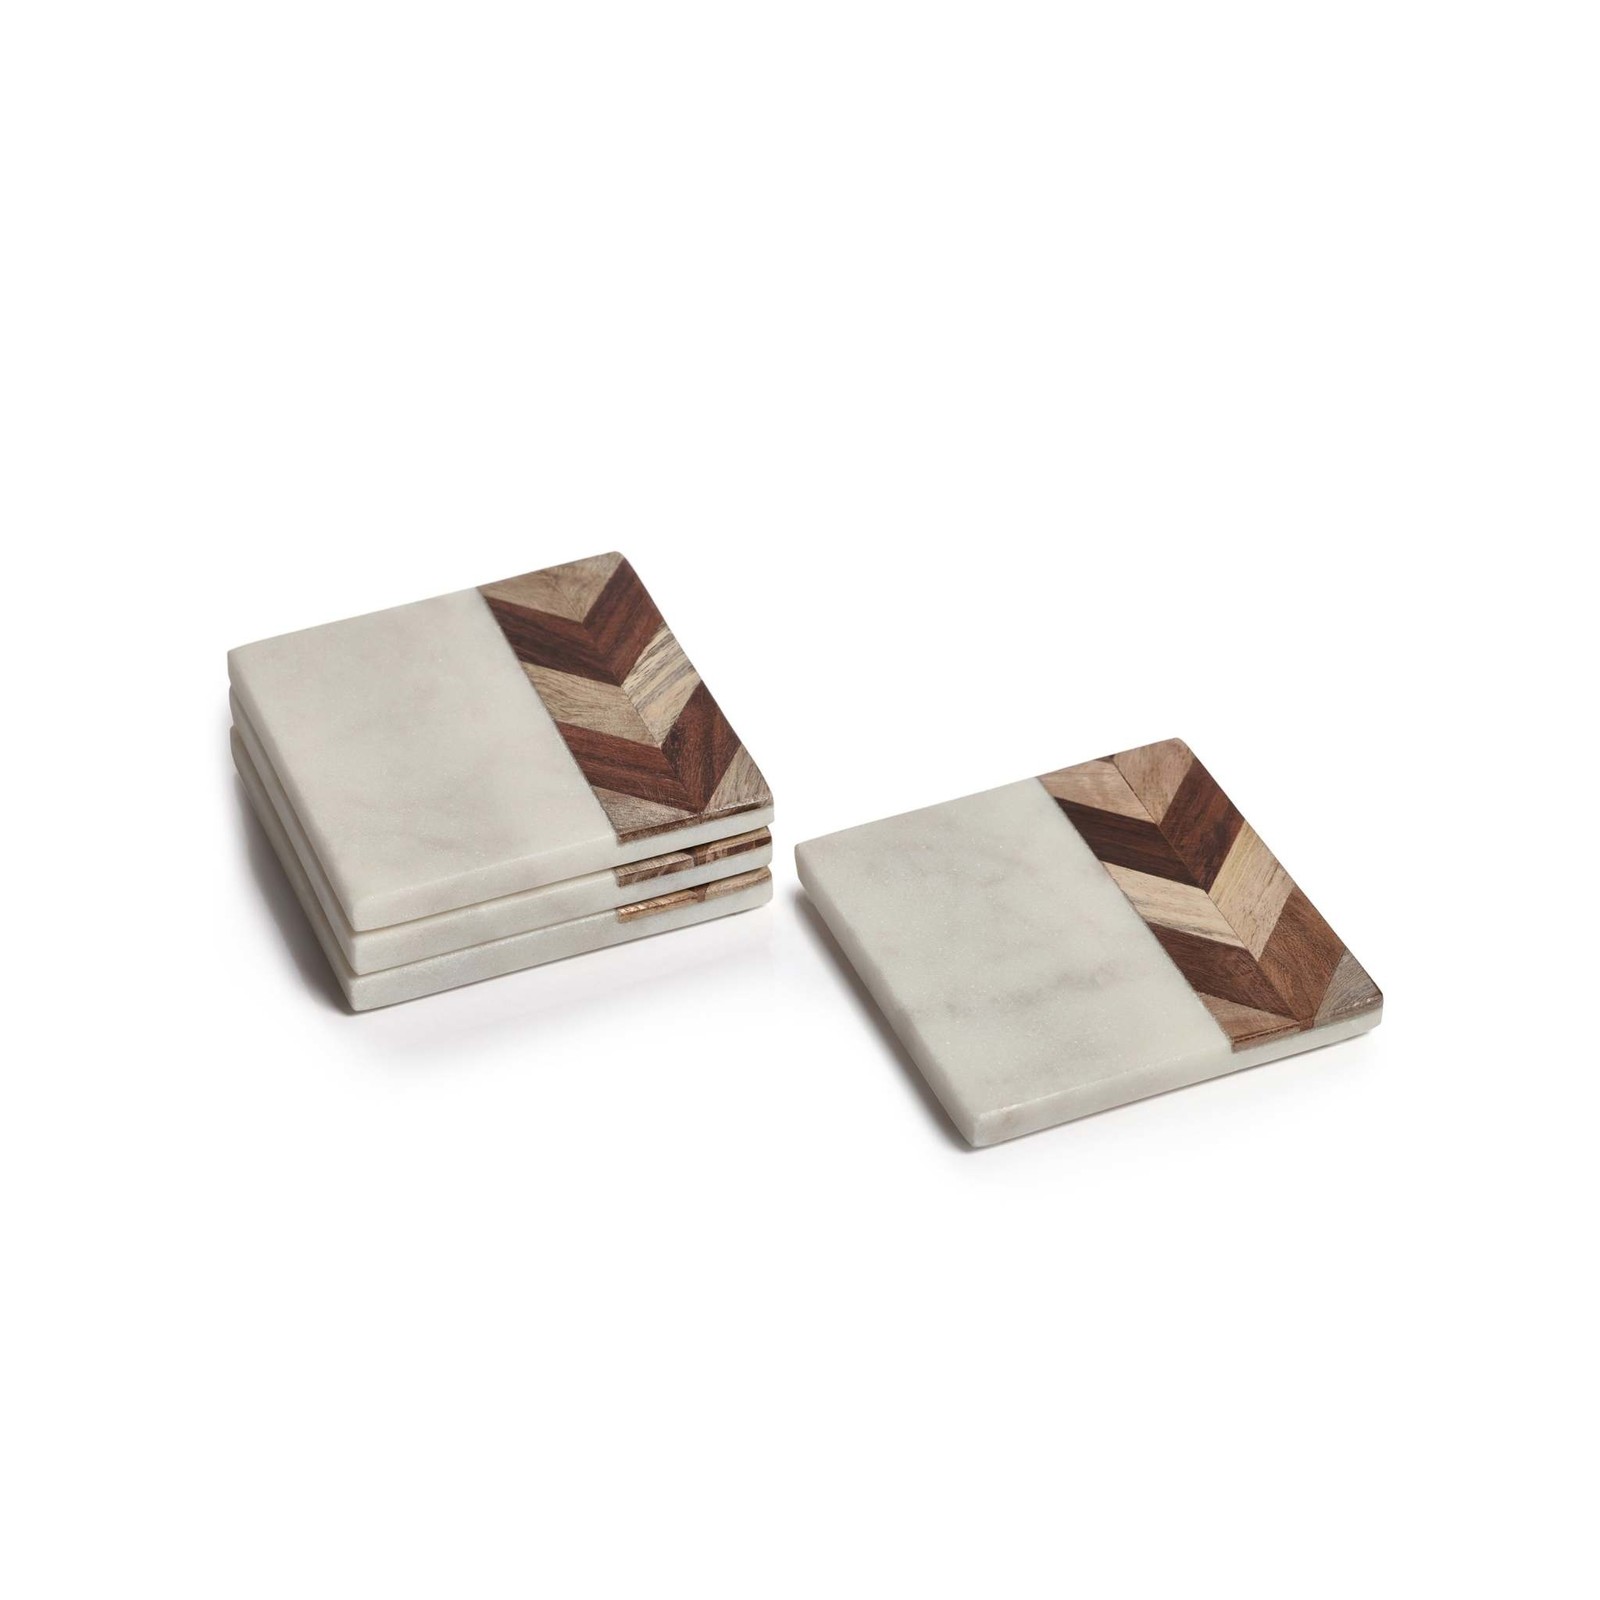 Zodax Milan Marble  Chevron Design Wood Coasters  s/4  IN-7345 loading=